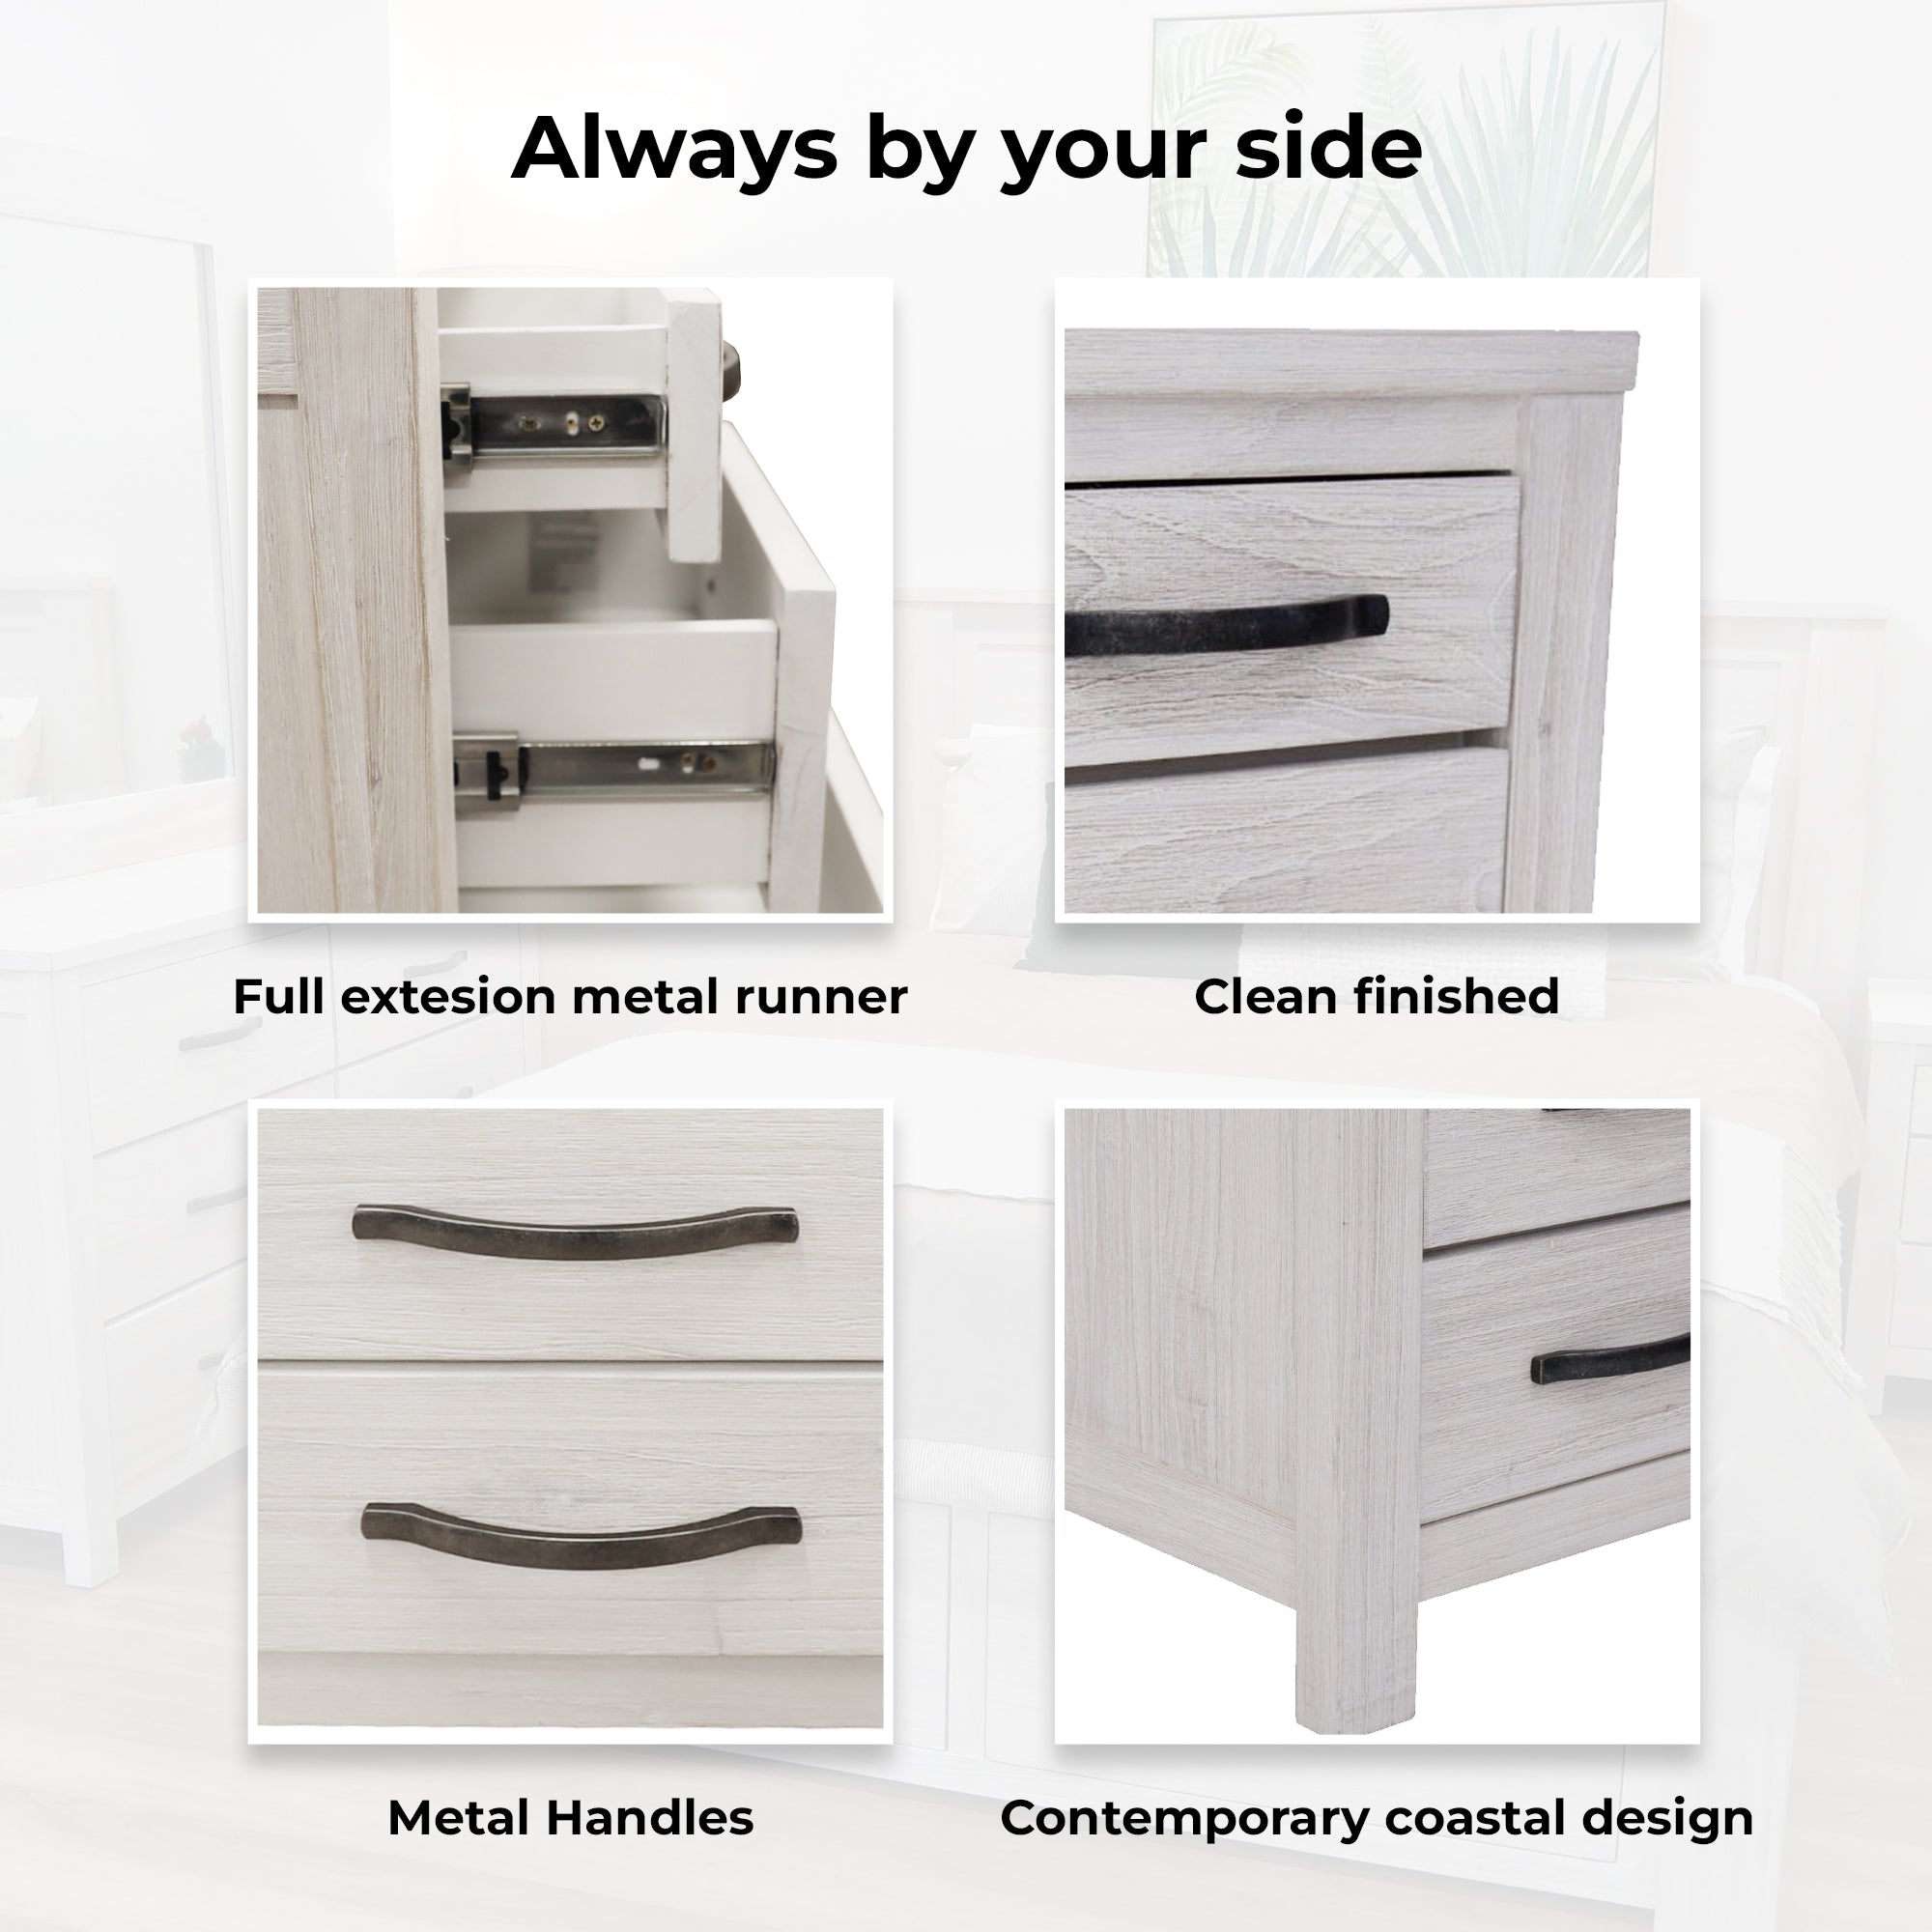 Foxglove Bedside Tables 3 Drawers Storage Cabinet Shelf Side End Table - White - SILBERSHELL